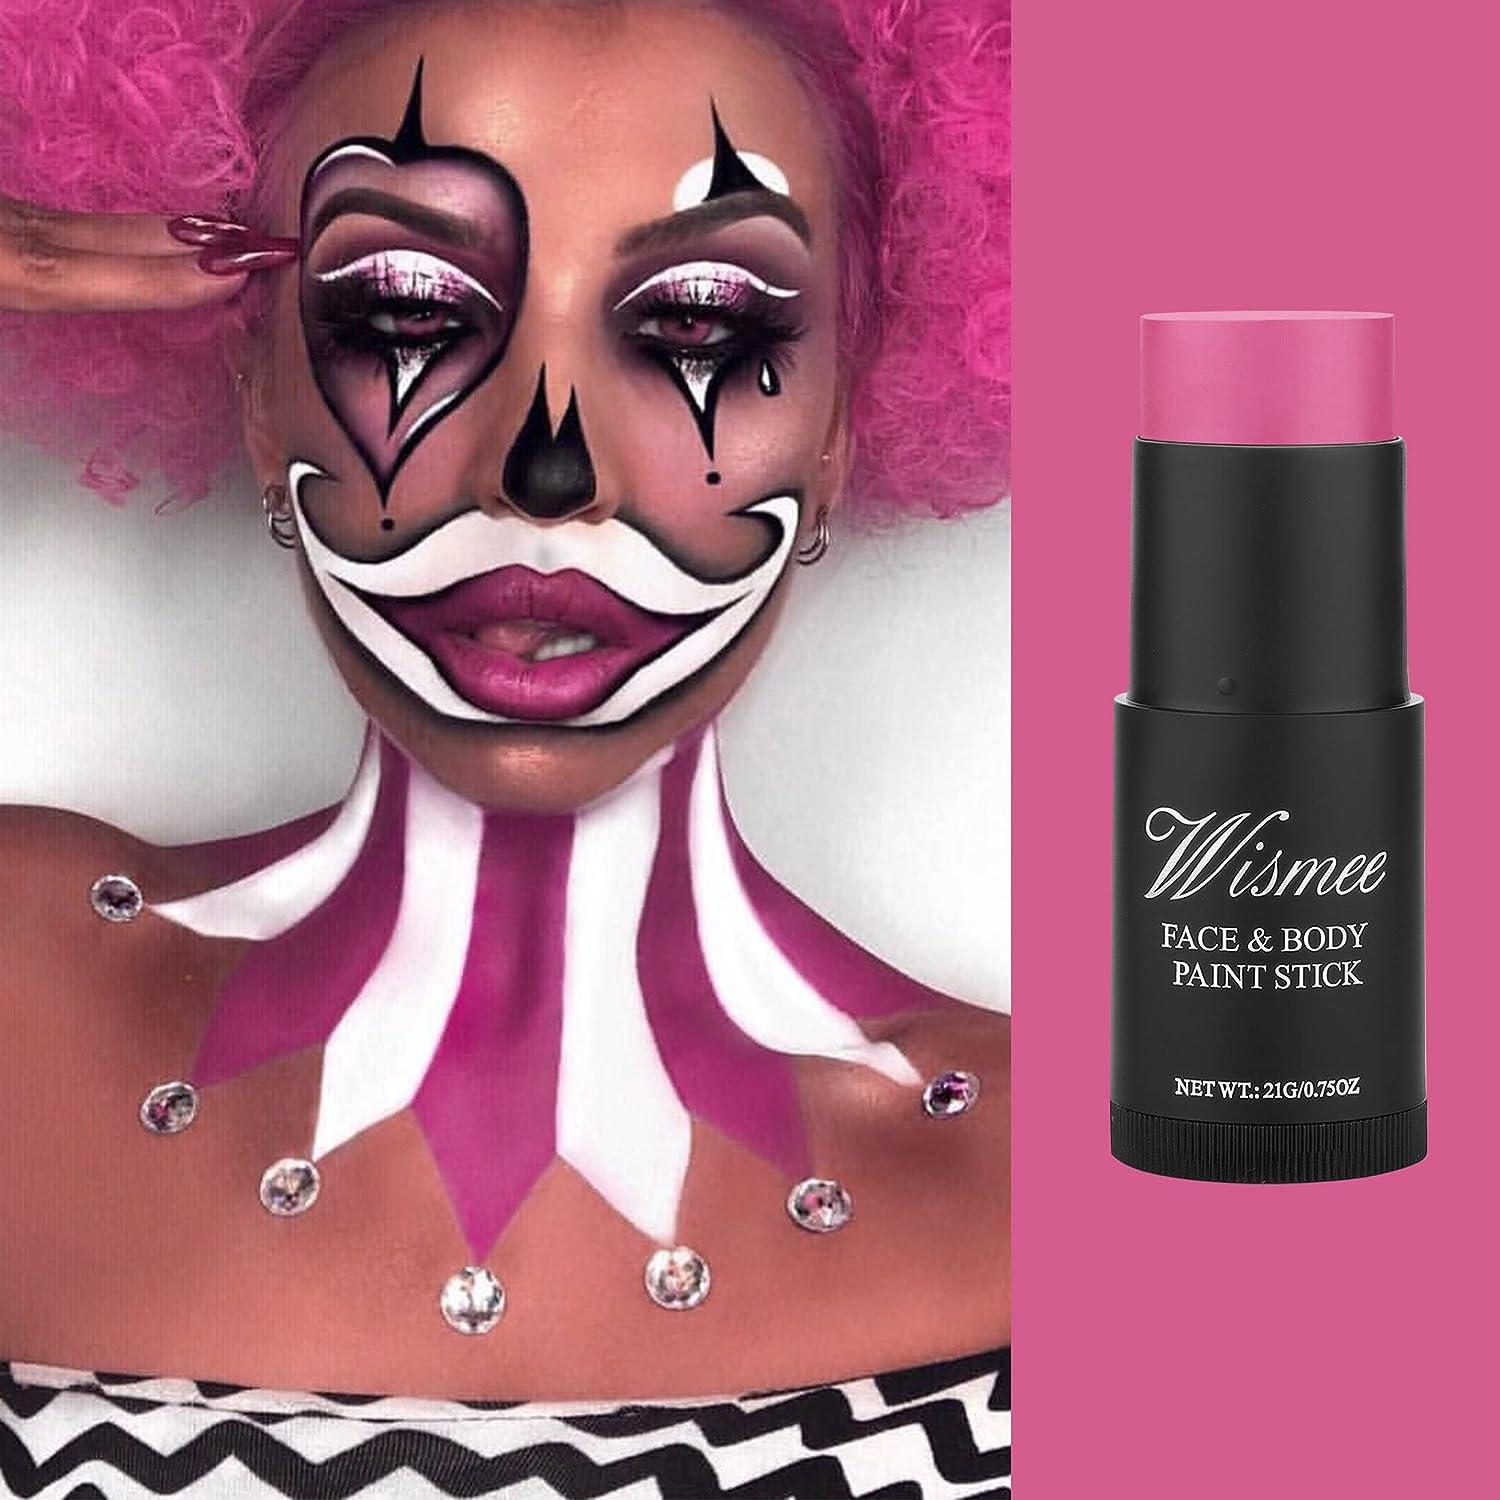 SDJMa Hot Pink Face Paint Stick, Cream Blendable Full Body Paint Stick,  Sweatproof Waterproof Body Paint Makeup Based Stick for Halloween Special